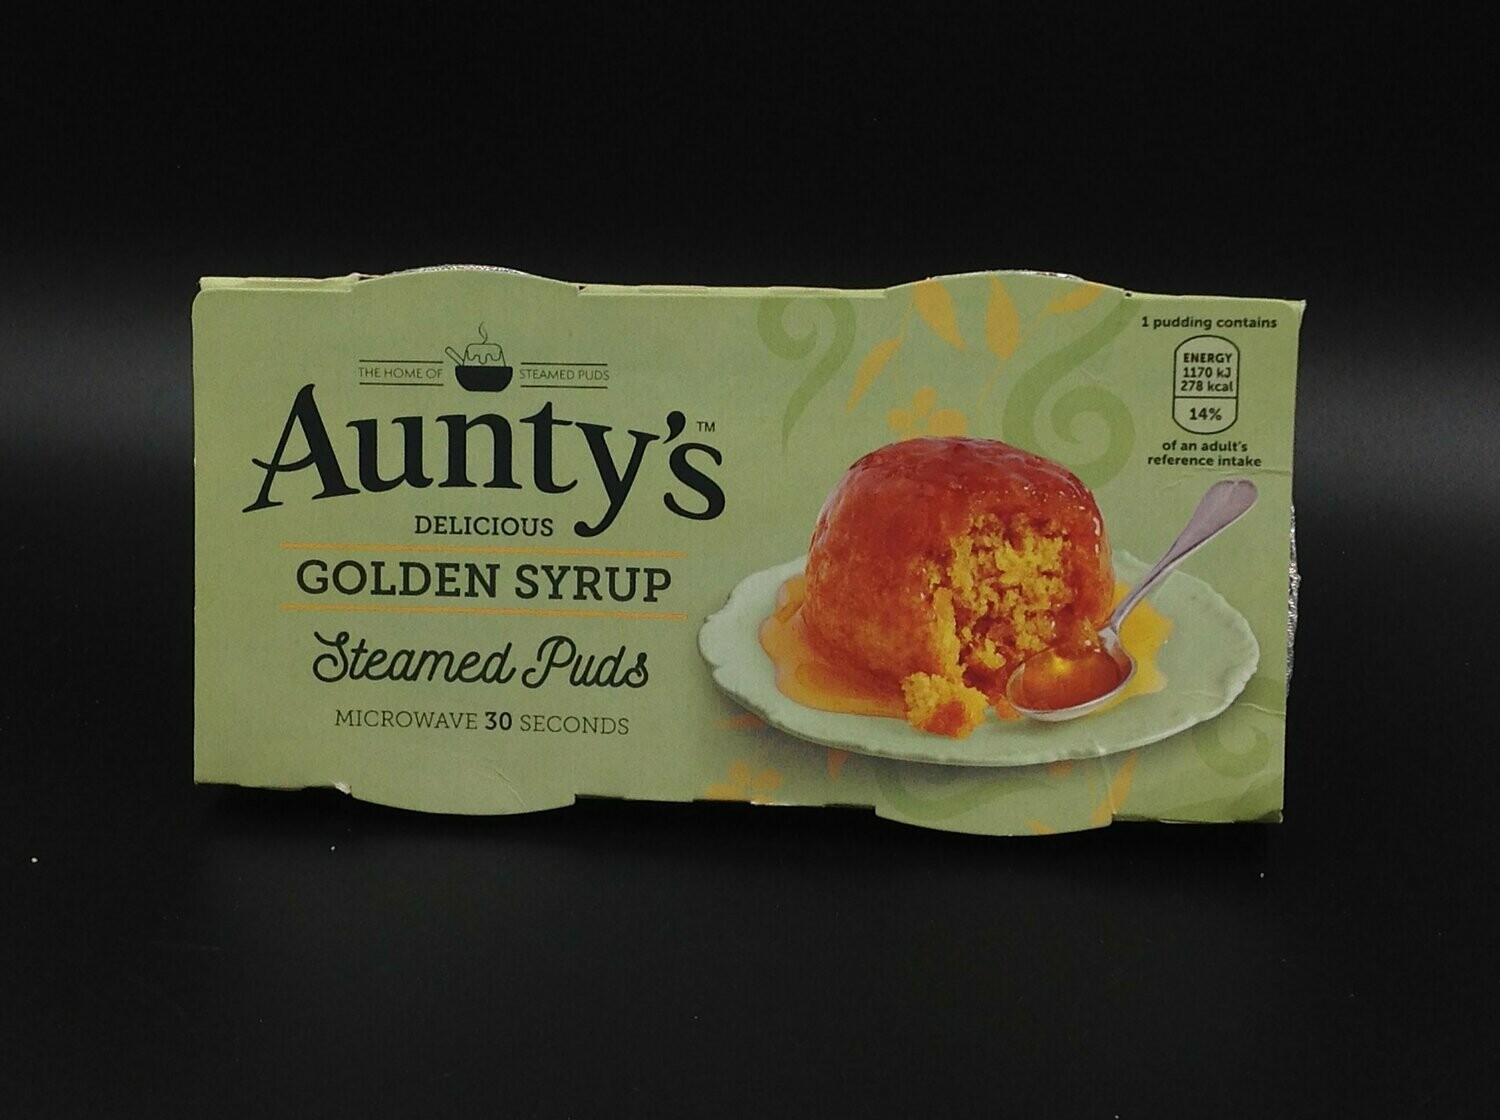 Aunty's Golden Syrup Steamed Puds 2x95g